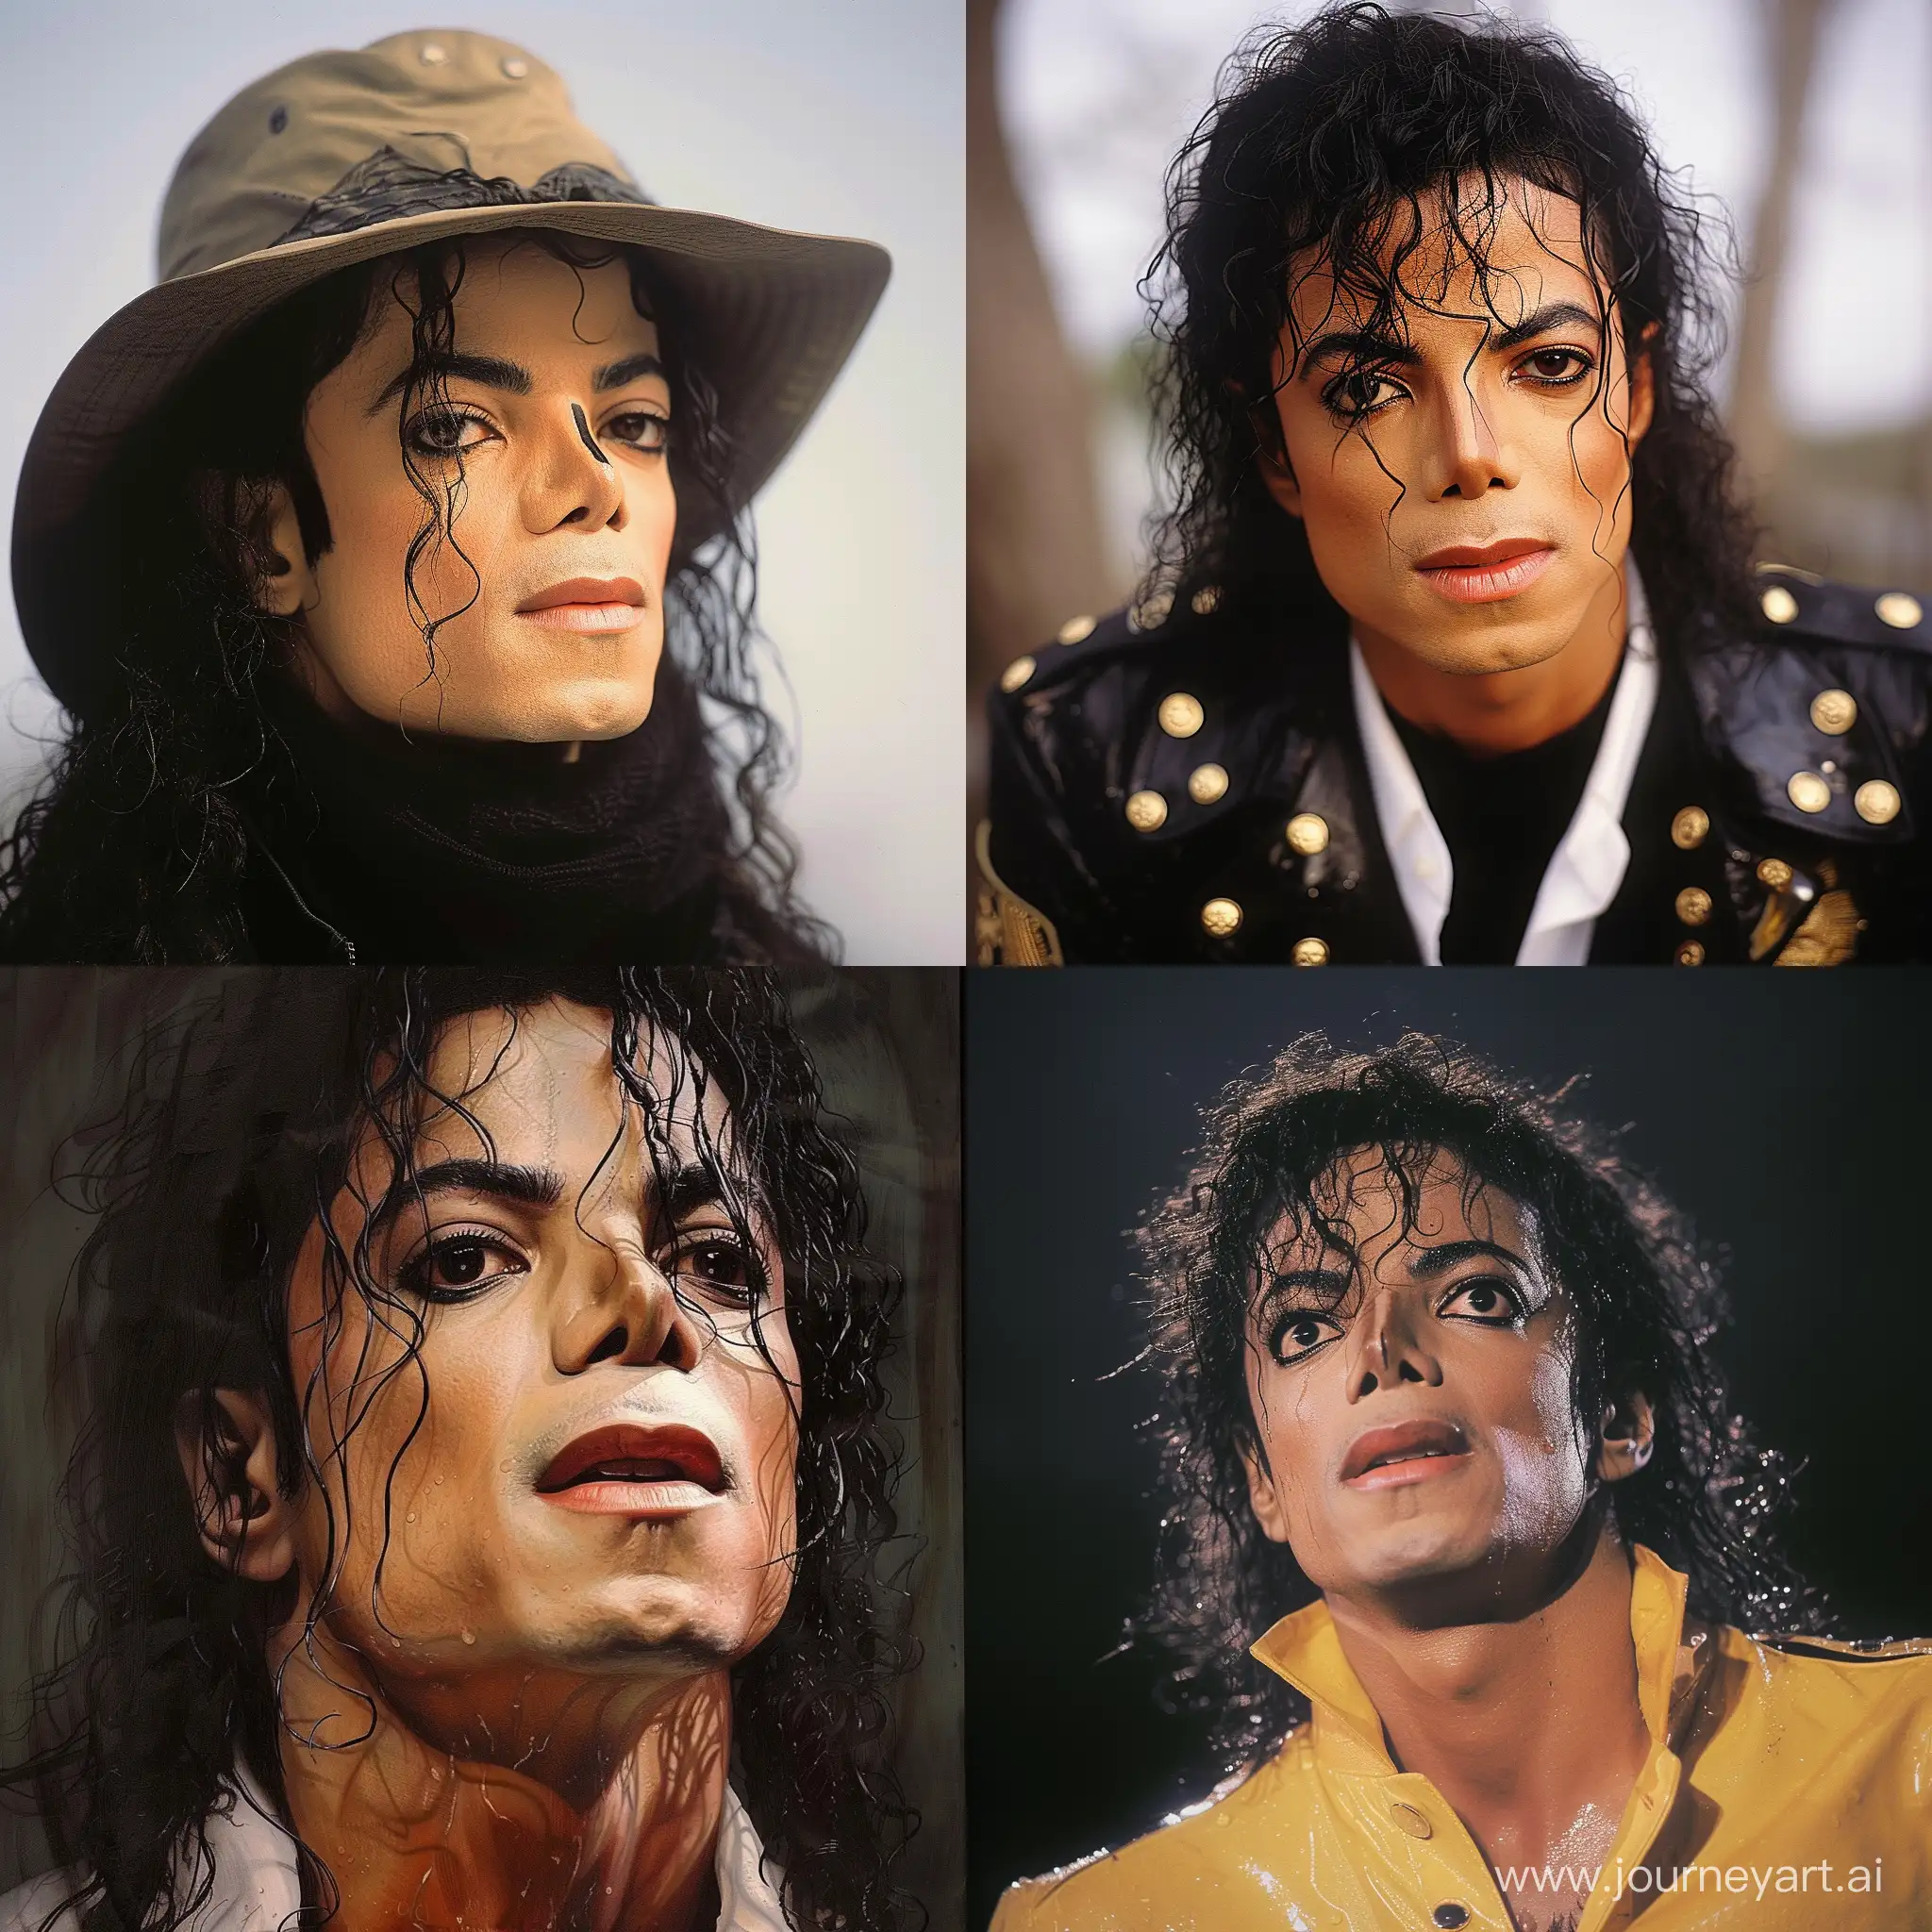 Michael-Jackson-Tribute-Capturing-the-Iconic-Dance-Moves